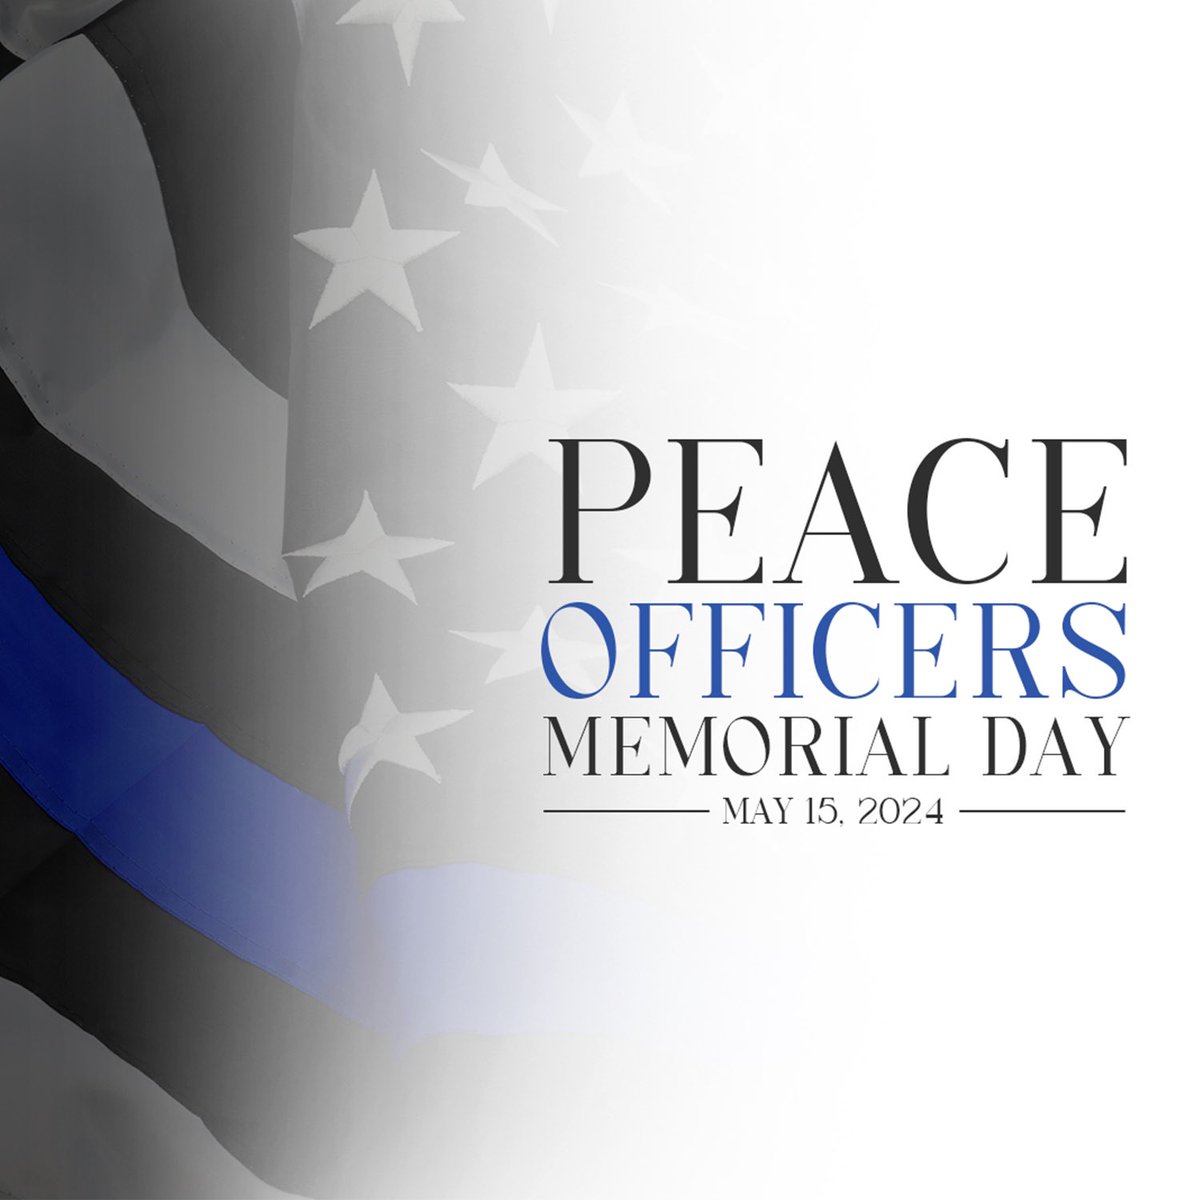 On Peace Officers Memorial Day we honor and remember the local, state, and federal peace officers who have given their lives in service to their communities. We will never forget these heroes.